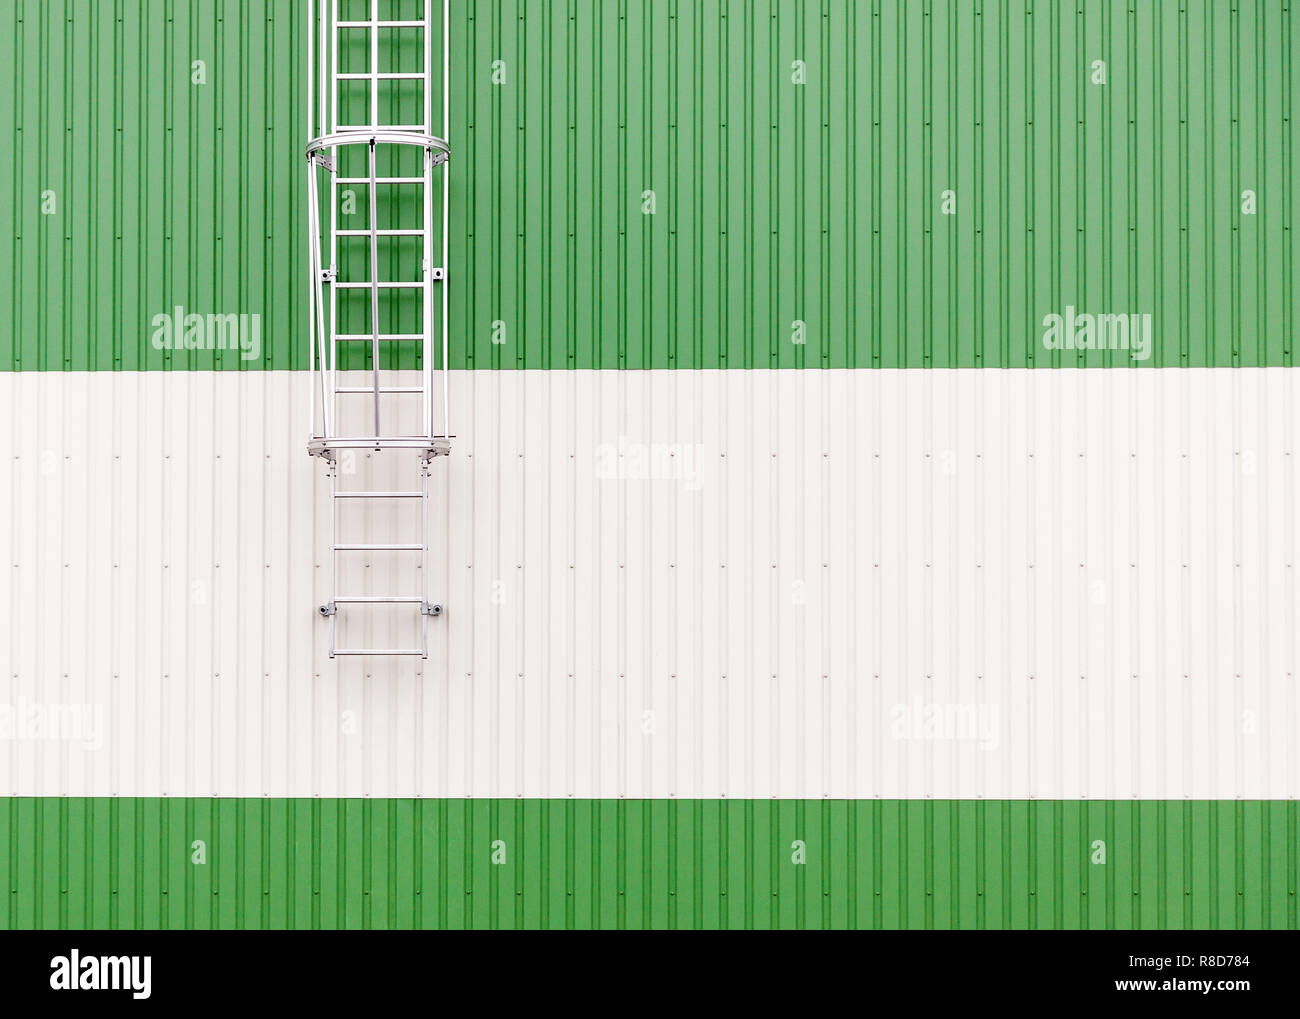 Industrial warehouse wall with metal ladder. Abstract minimalist picture with copy space on the right Stock Photo